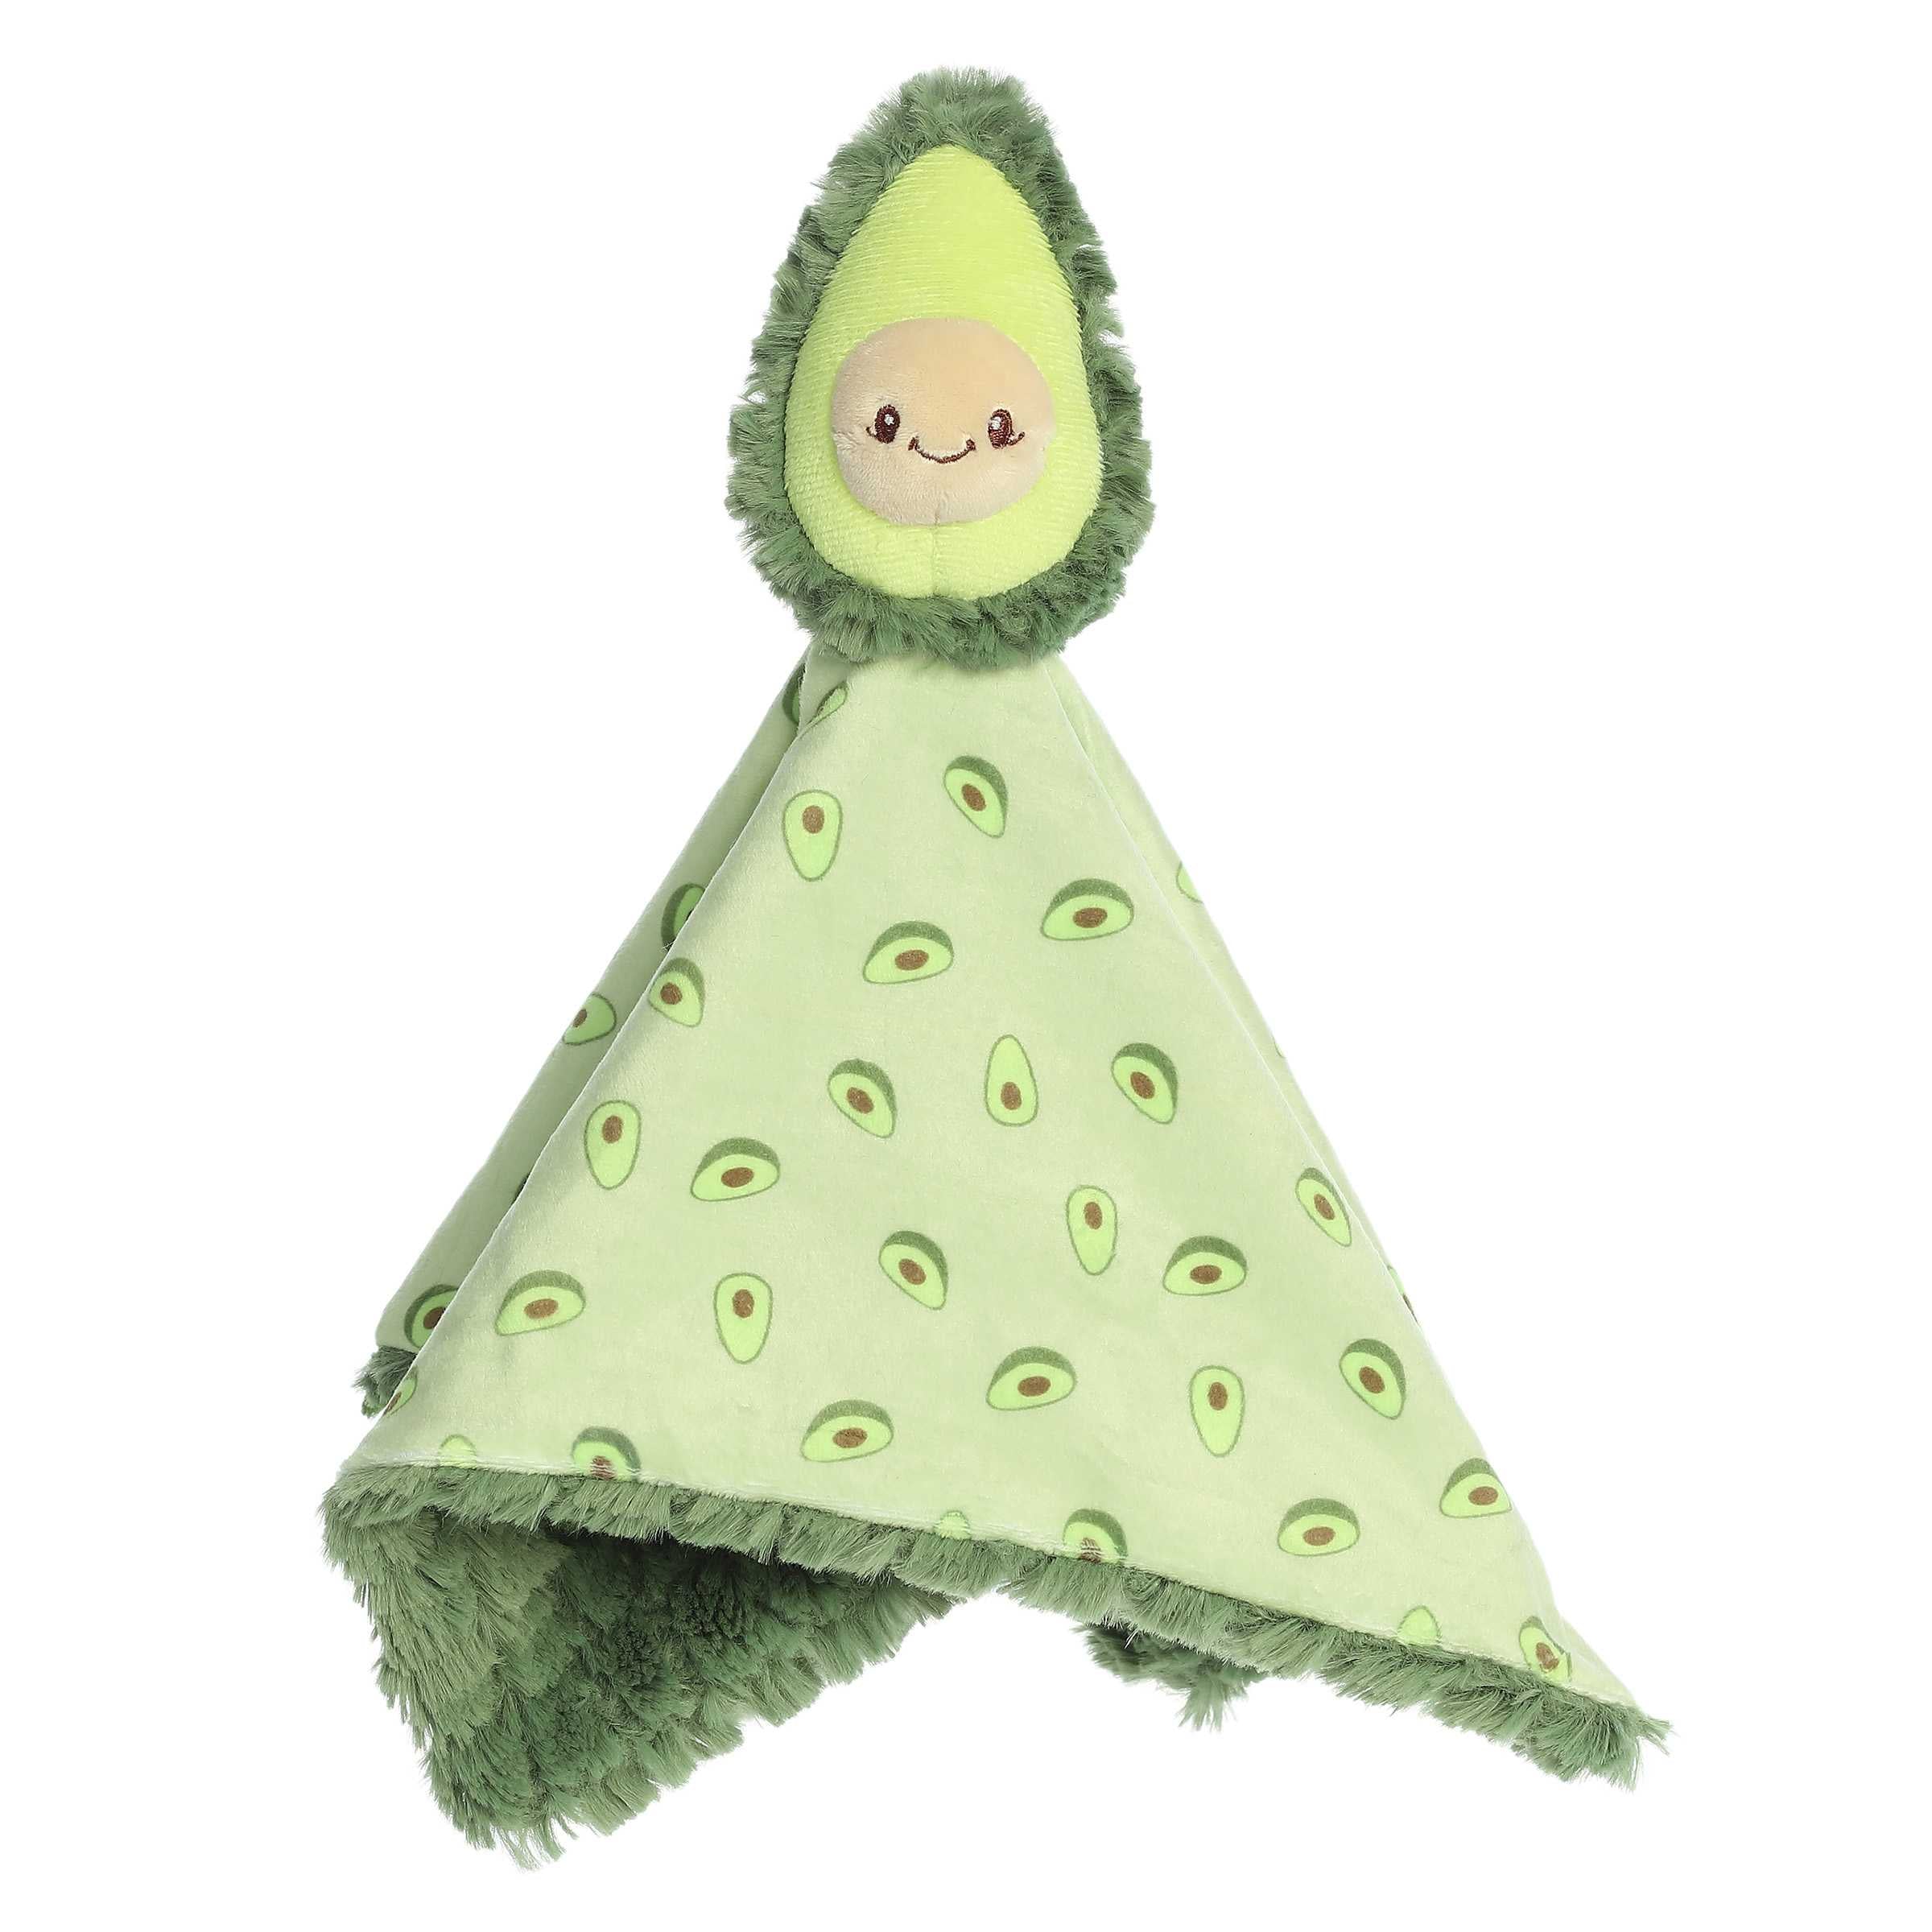 Cuddly Avocado Plush with a green round body and attached green baby blanket with fruit design and green fur on the back